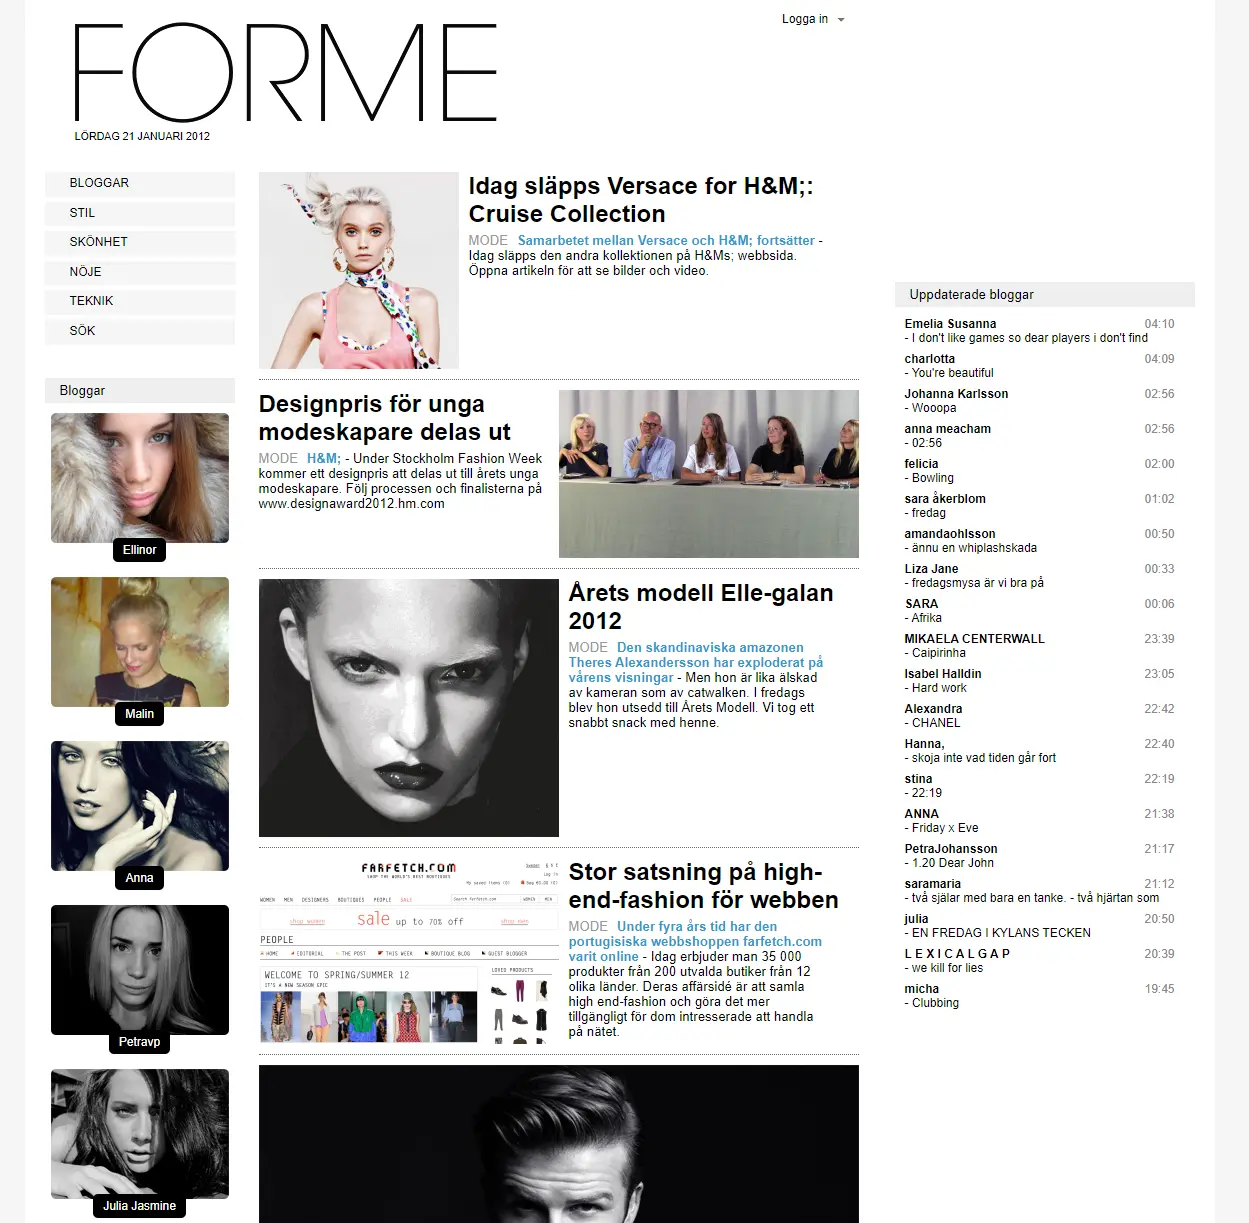 Magazine and blog front page